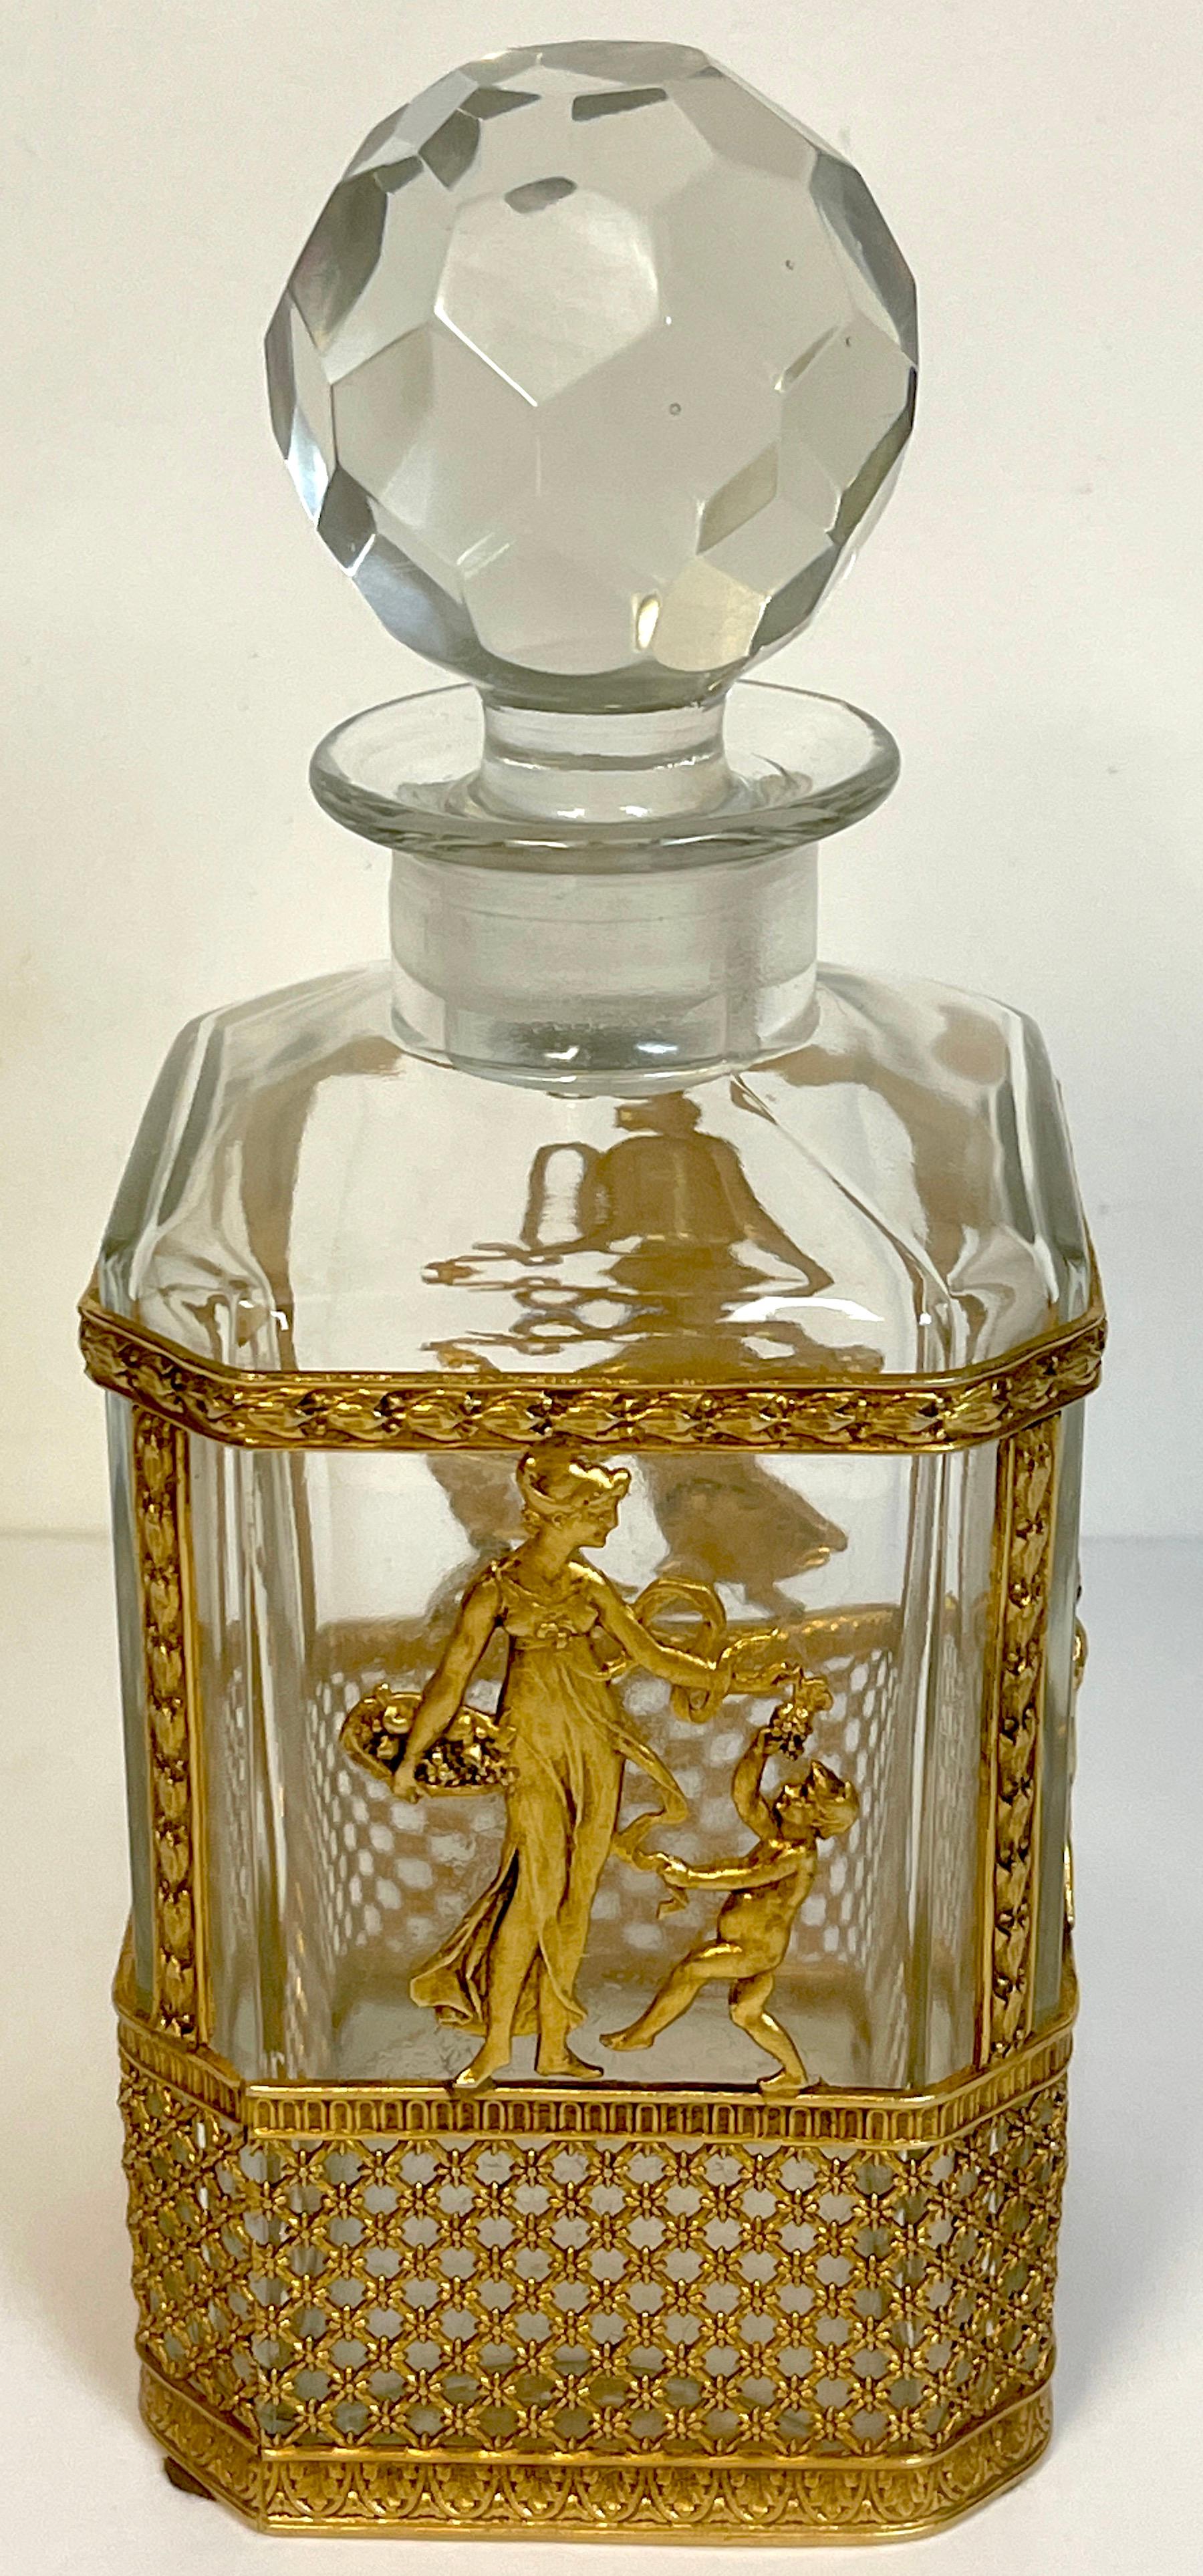 19th Century Empire Baccarat Style Ormolu Mounted Decanter For Sale